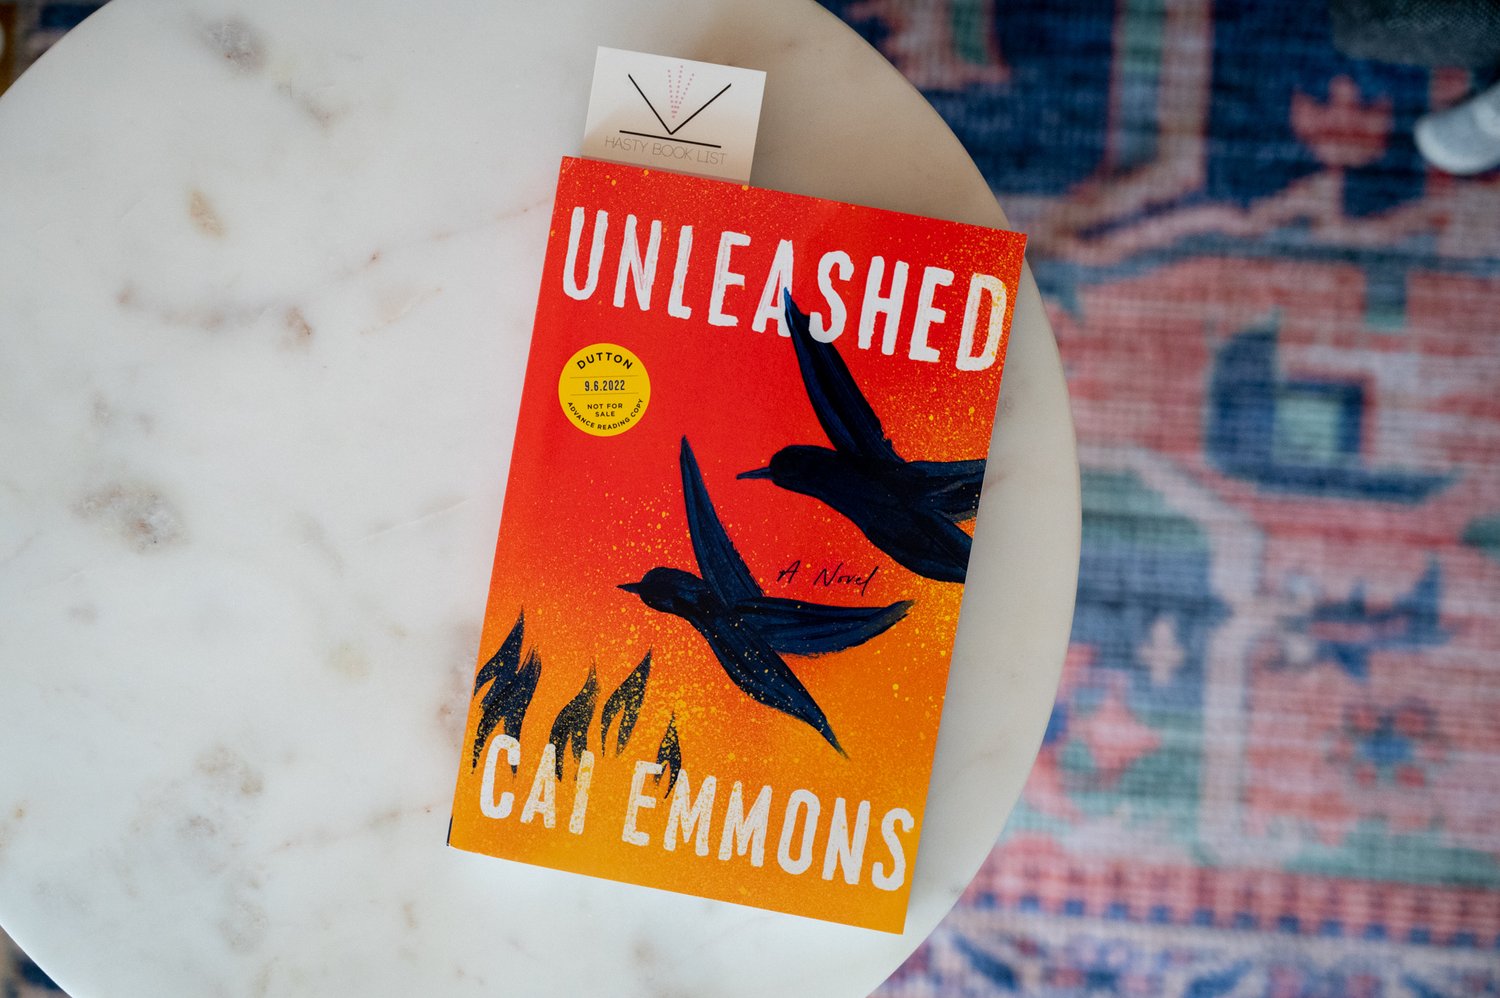 UNLEASHED by author Cai Emmons